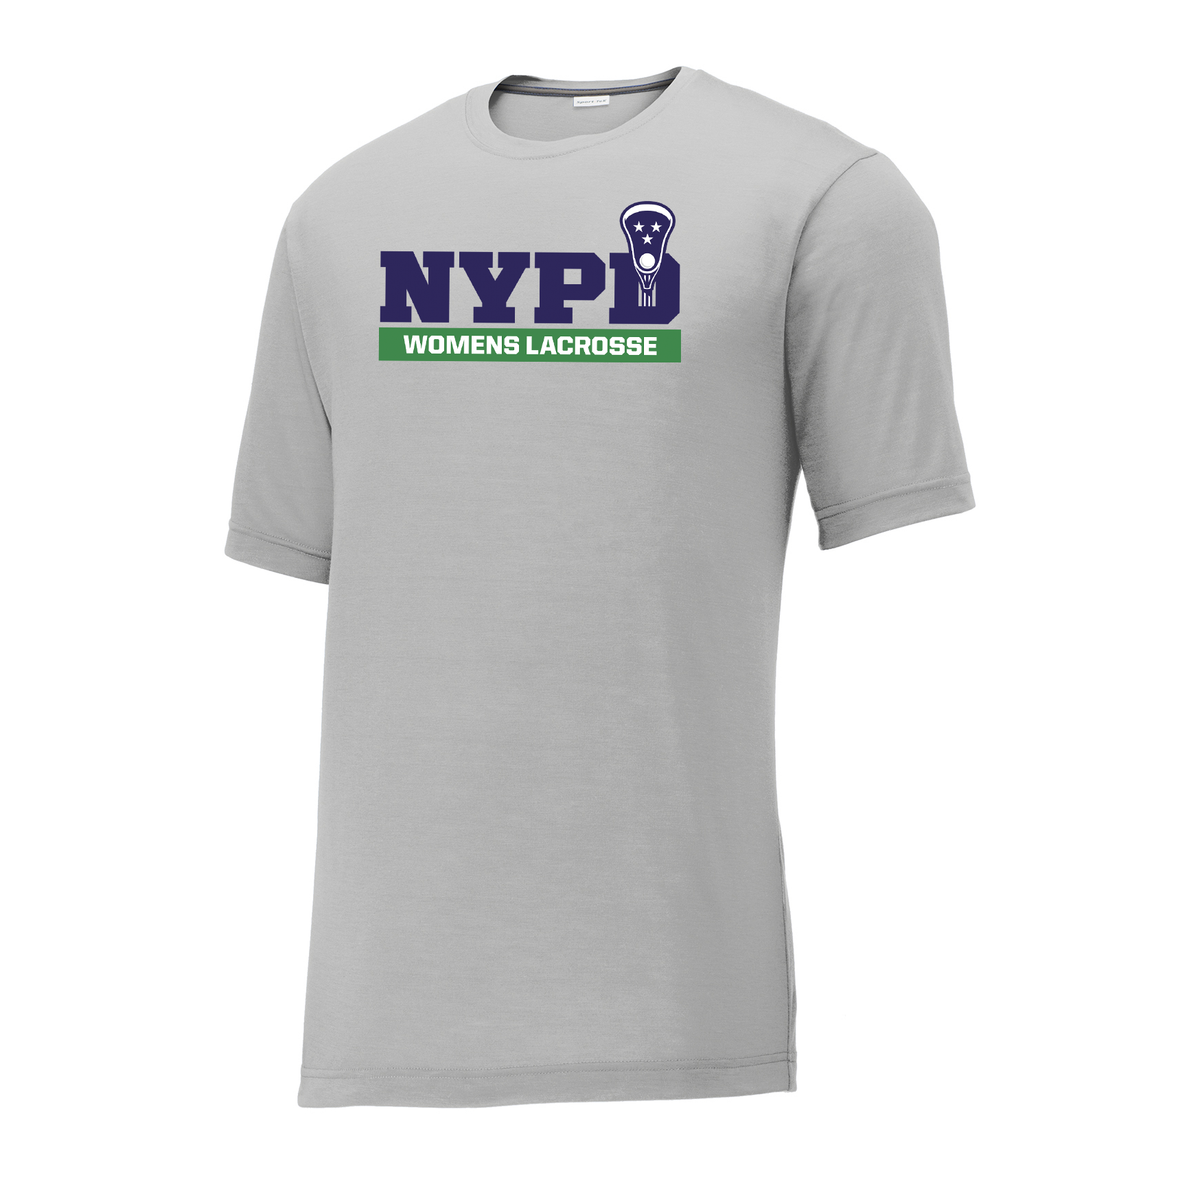 NYPD Womens Lacrosse CottonTouch Performance T-Shirt